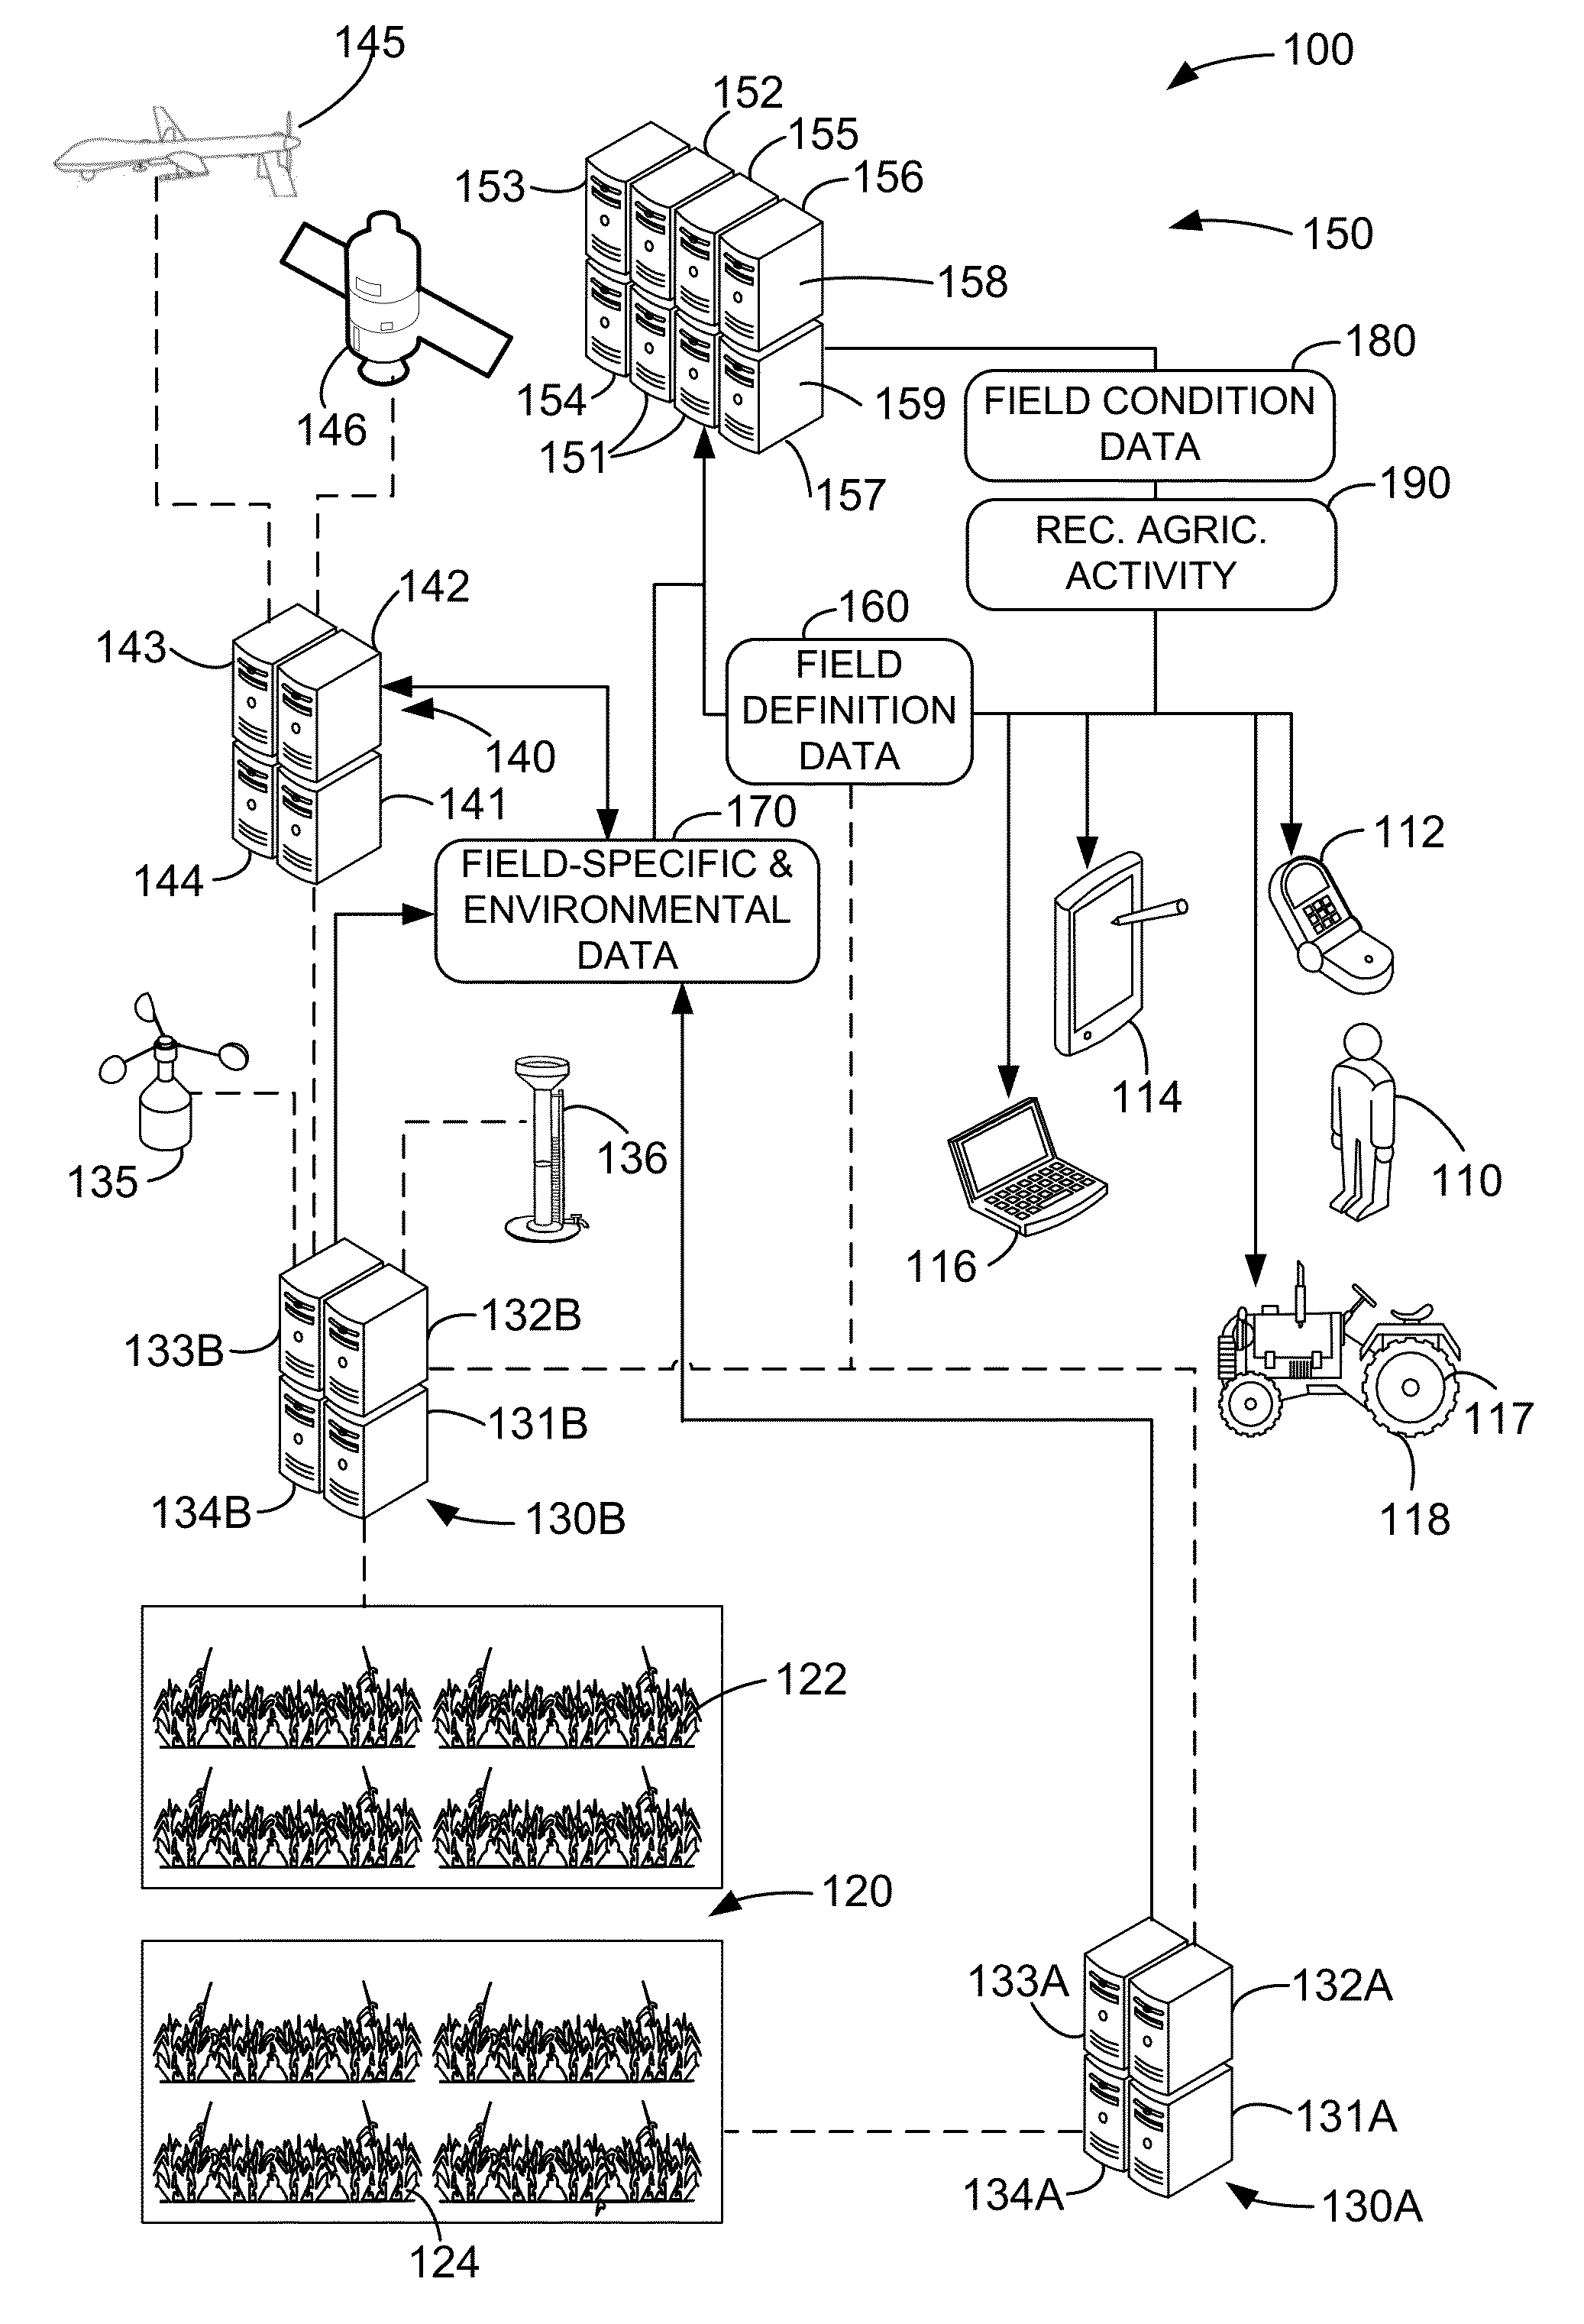 Methods and systems for managing agricultural activities